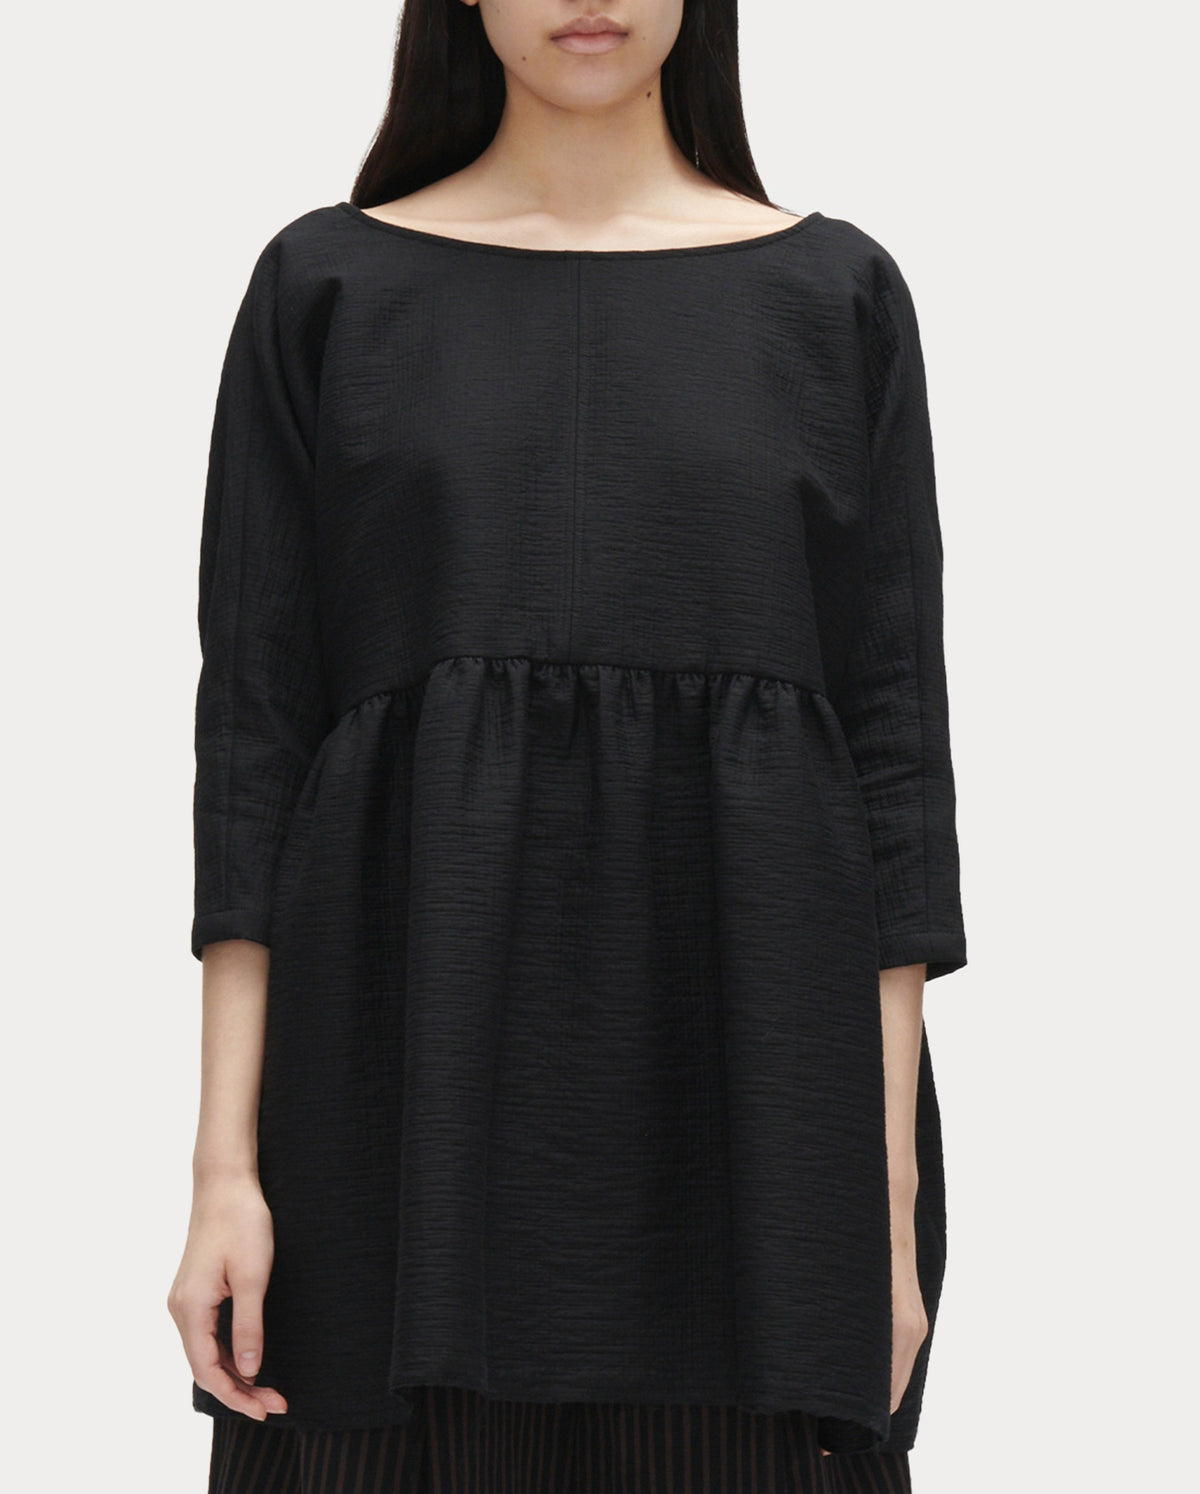 Oust Top - Black